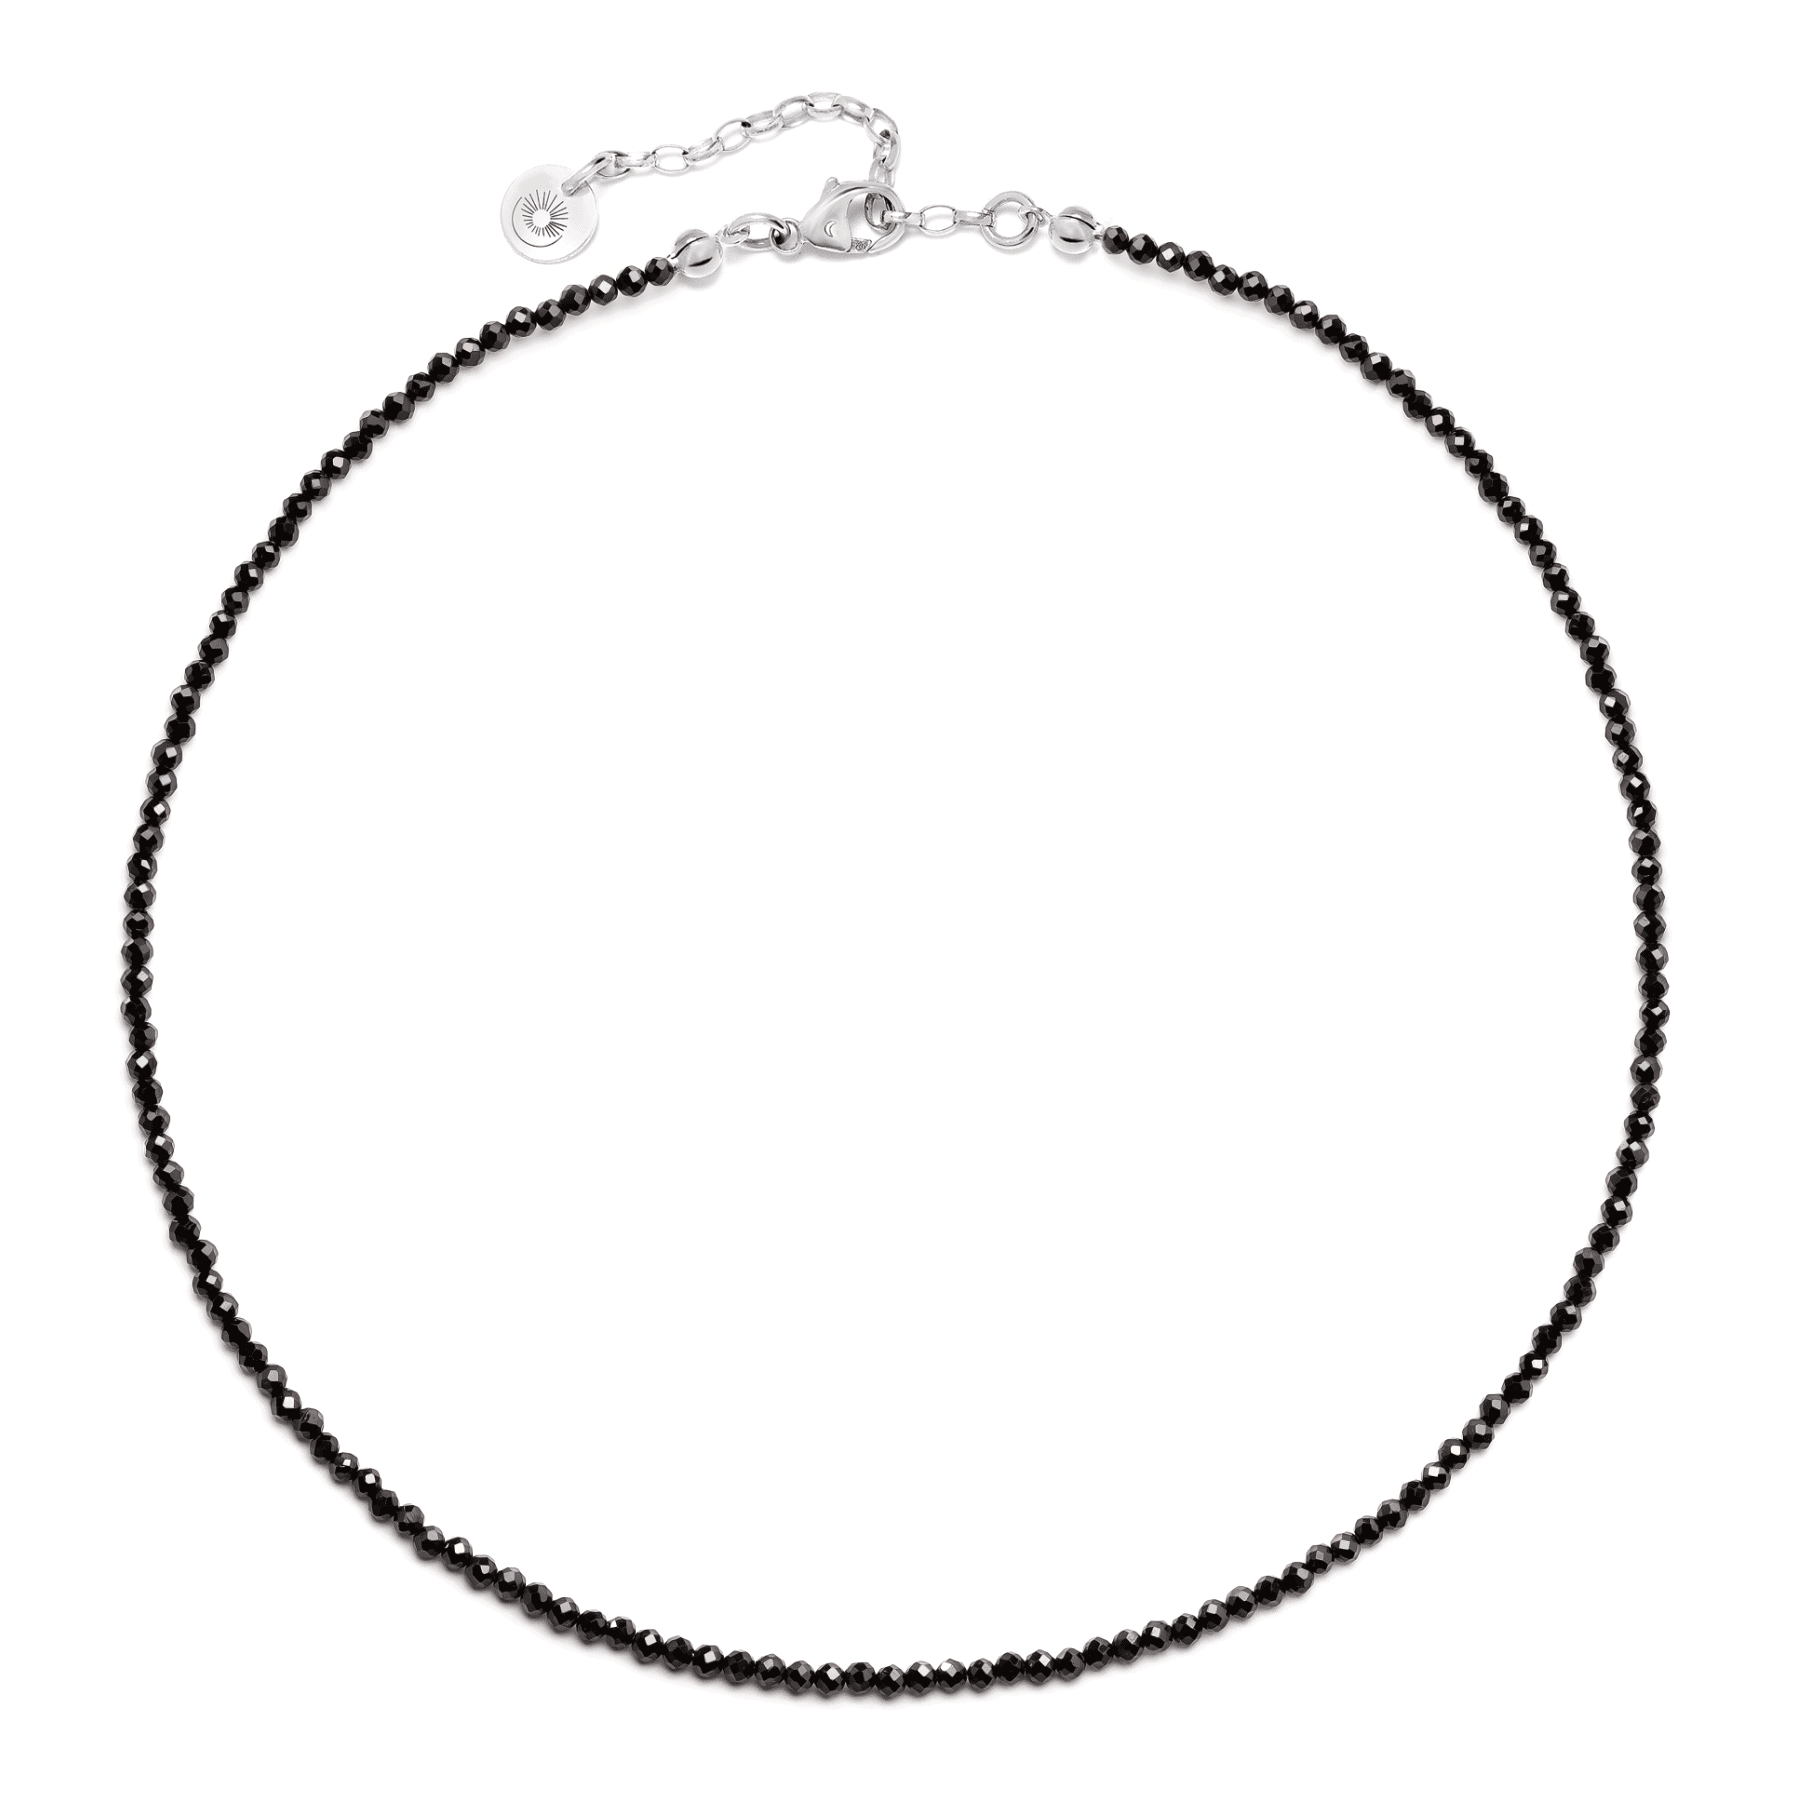 Black necklace choker with silver elements on white background.